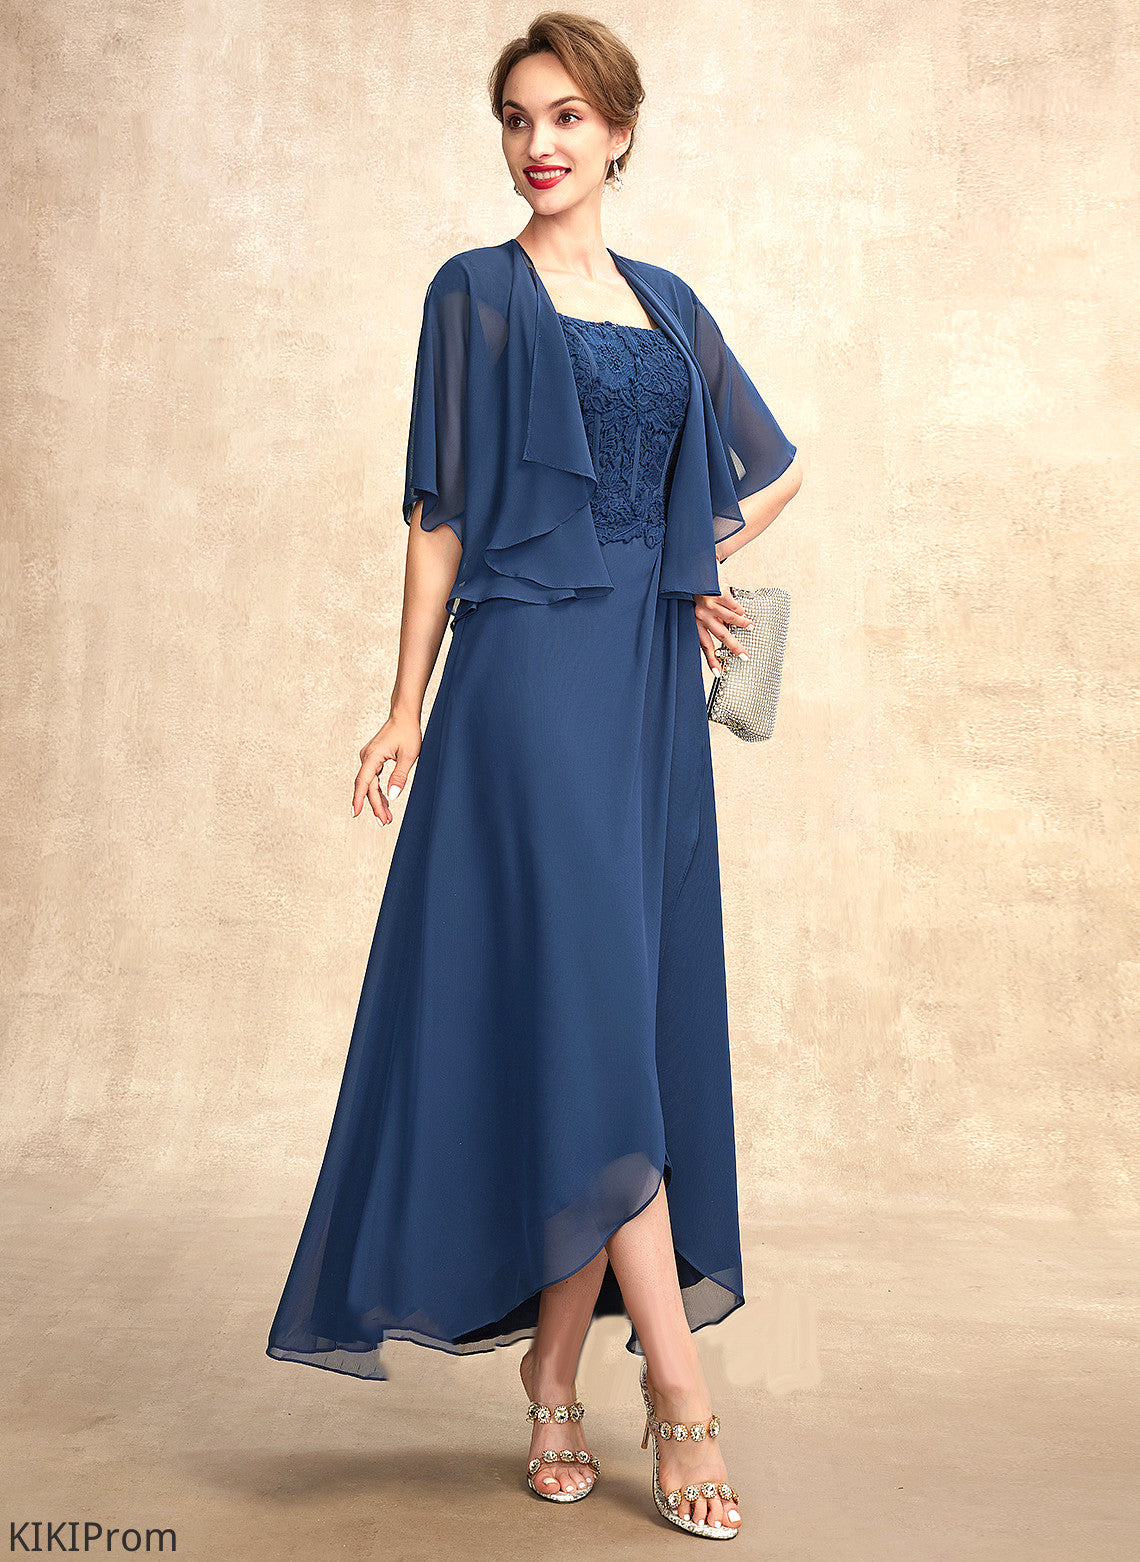 A-Line Lace of Mother of the Bride Dresses Mother Kara the Square Dress Chiffon Bride Asymmetrical Neckline